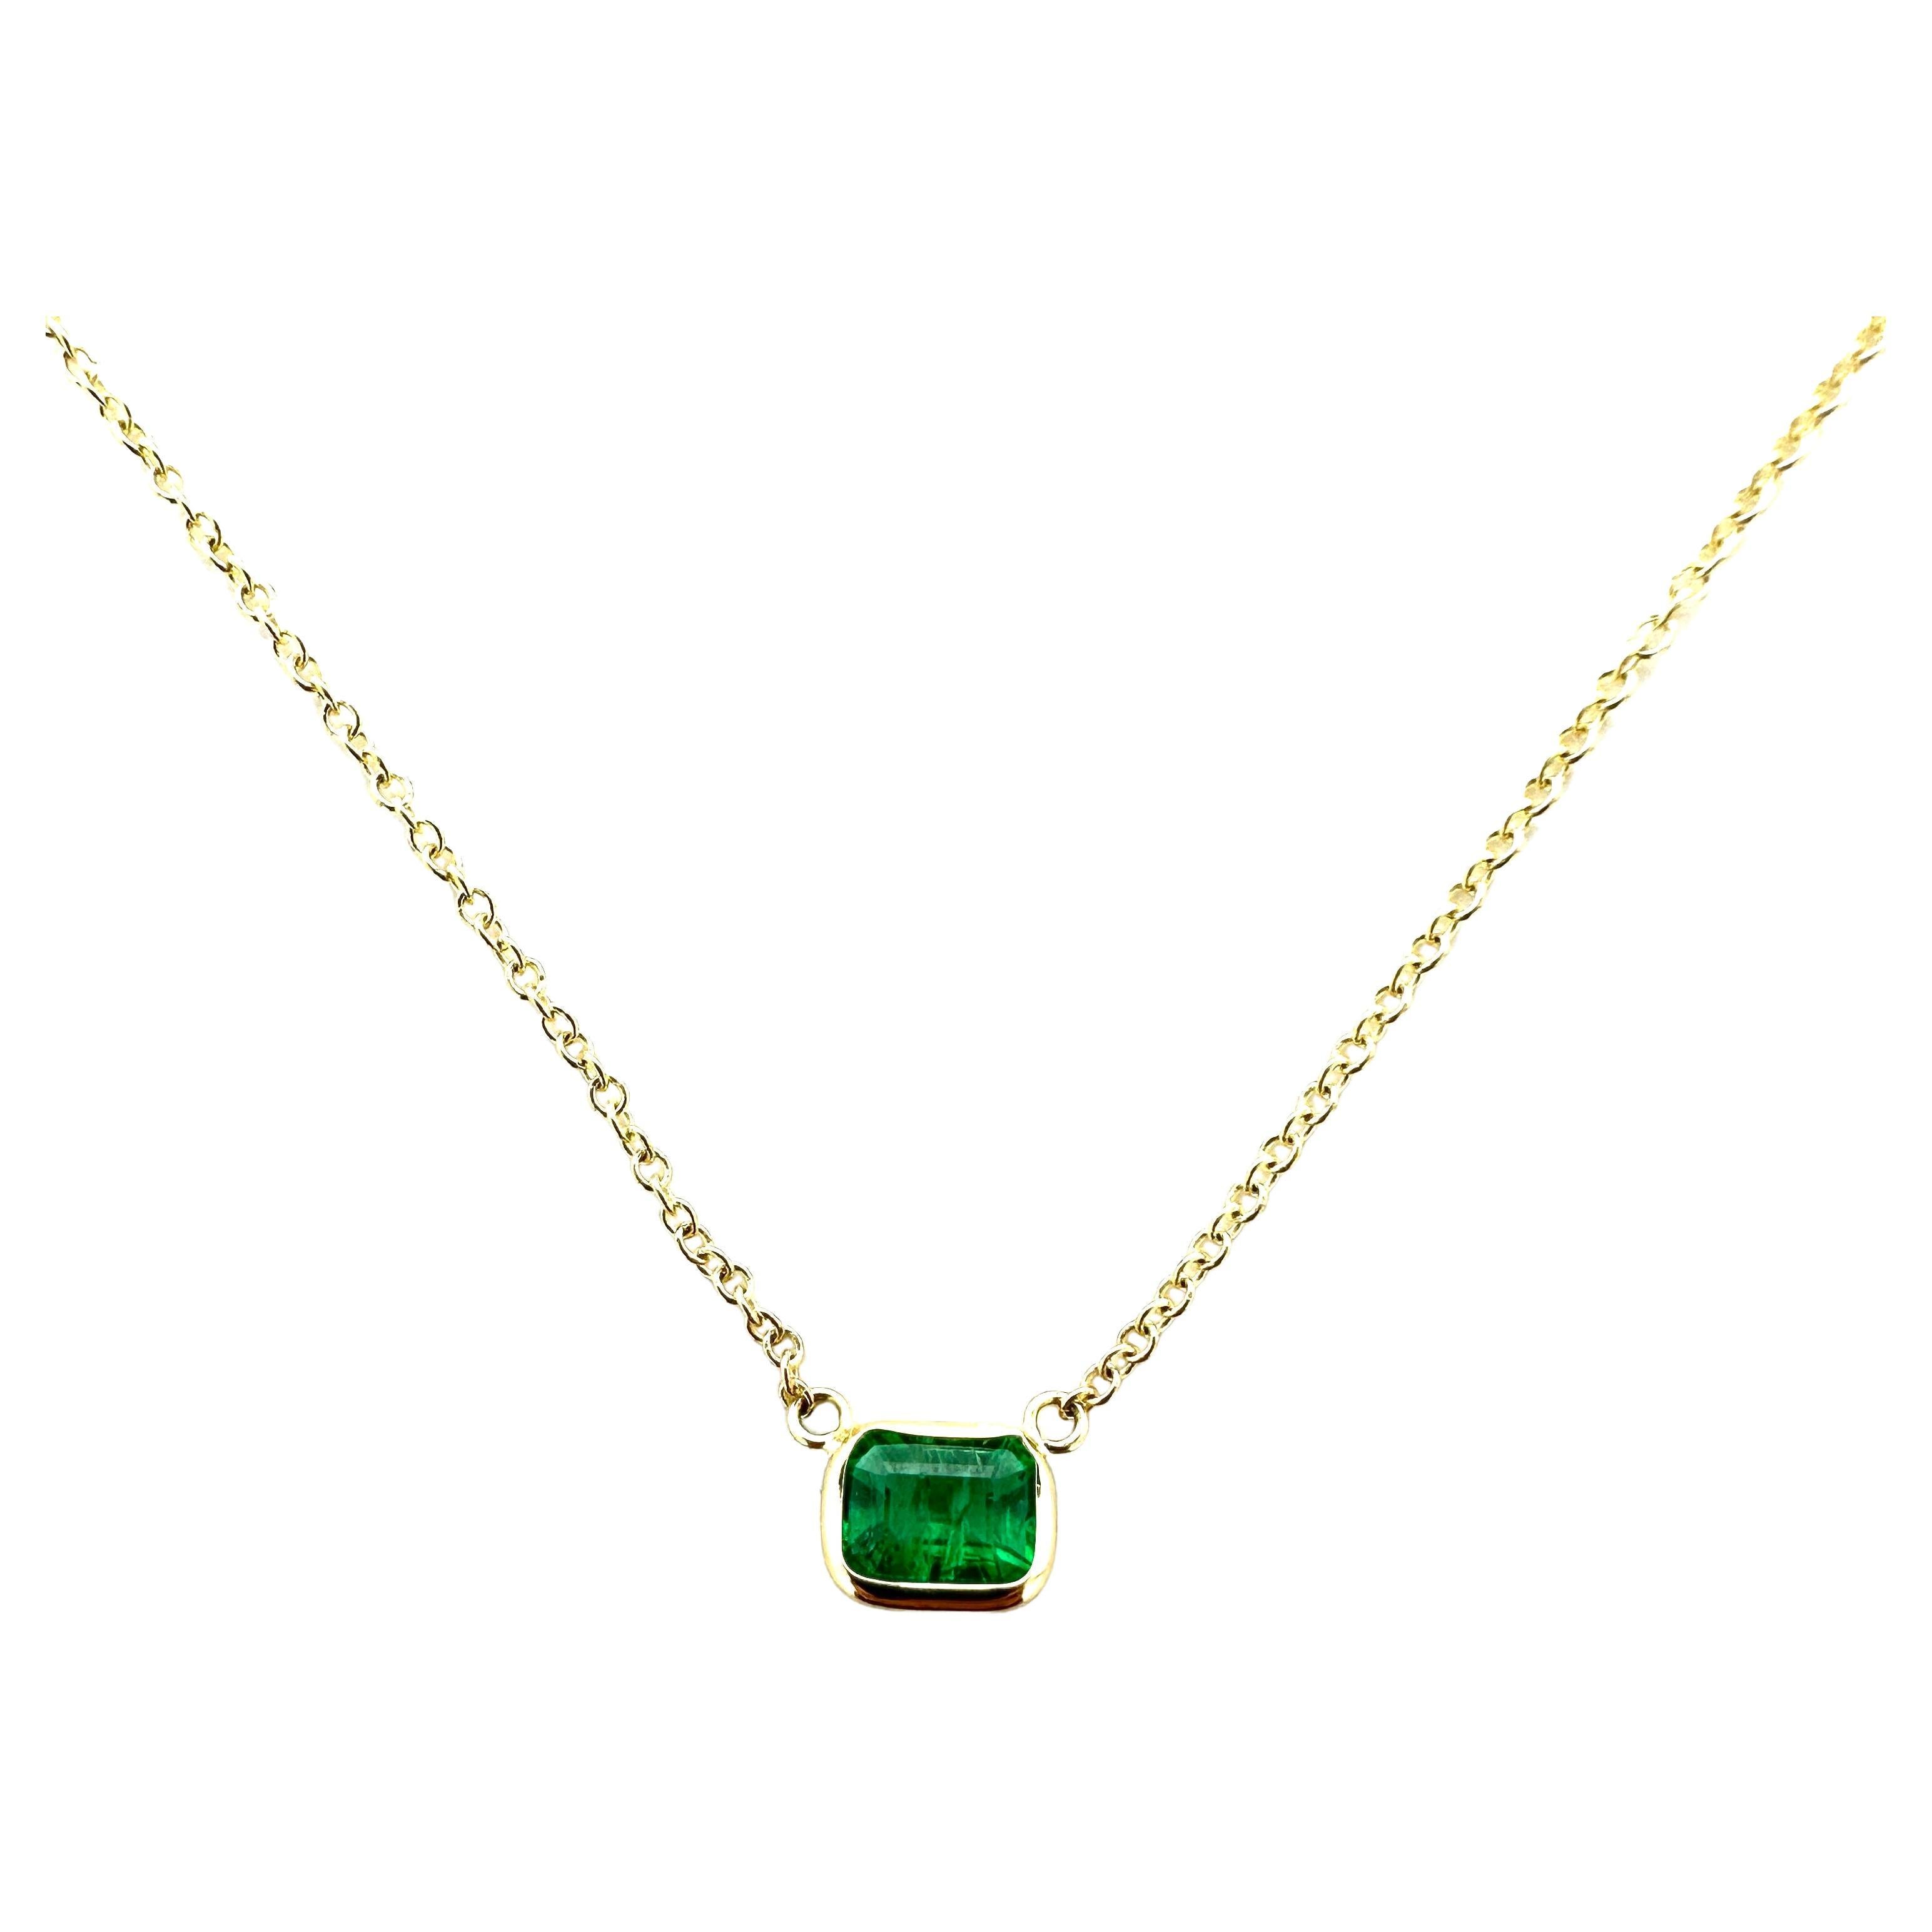 0.71 Carat Weight Green Emerald Solitaire Necklace in 14k Yellow Gold